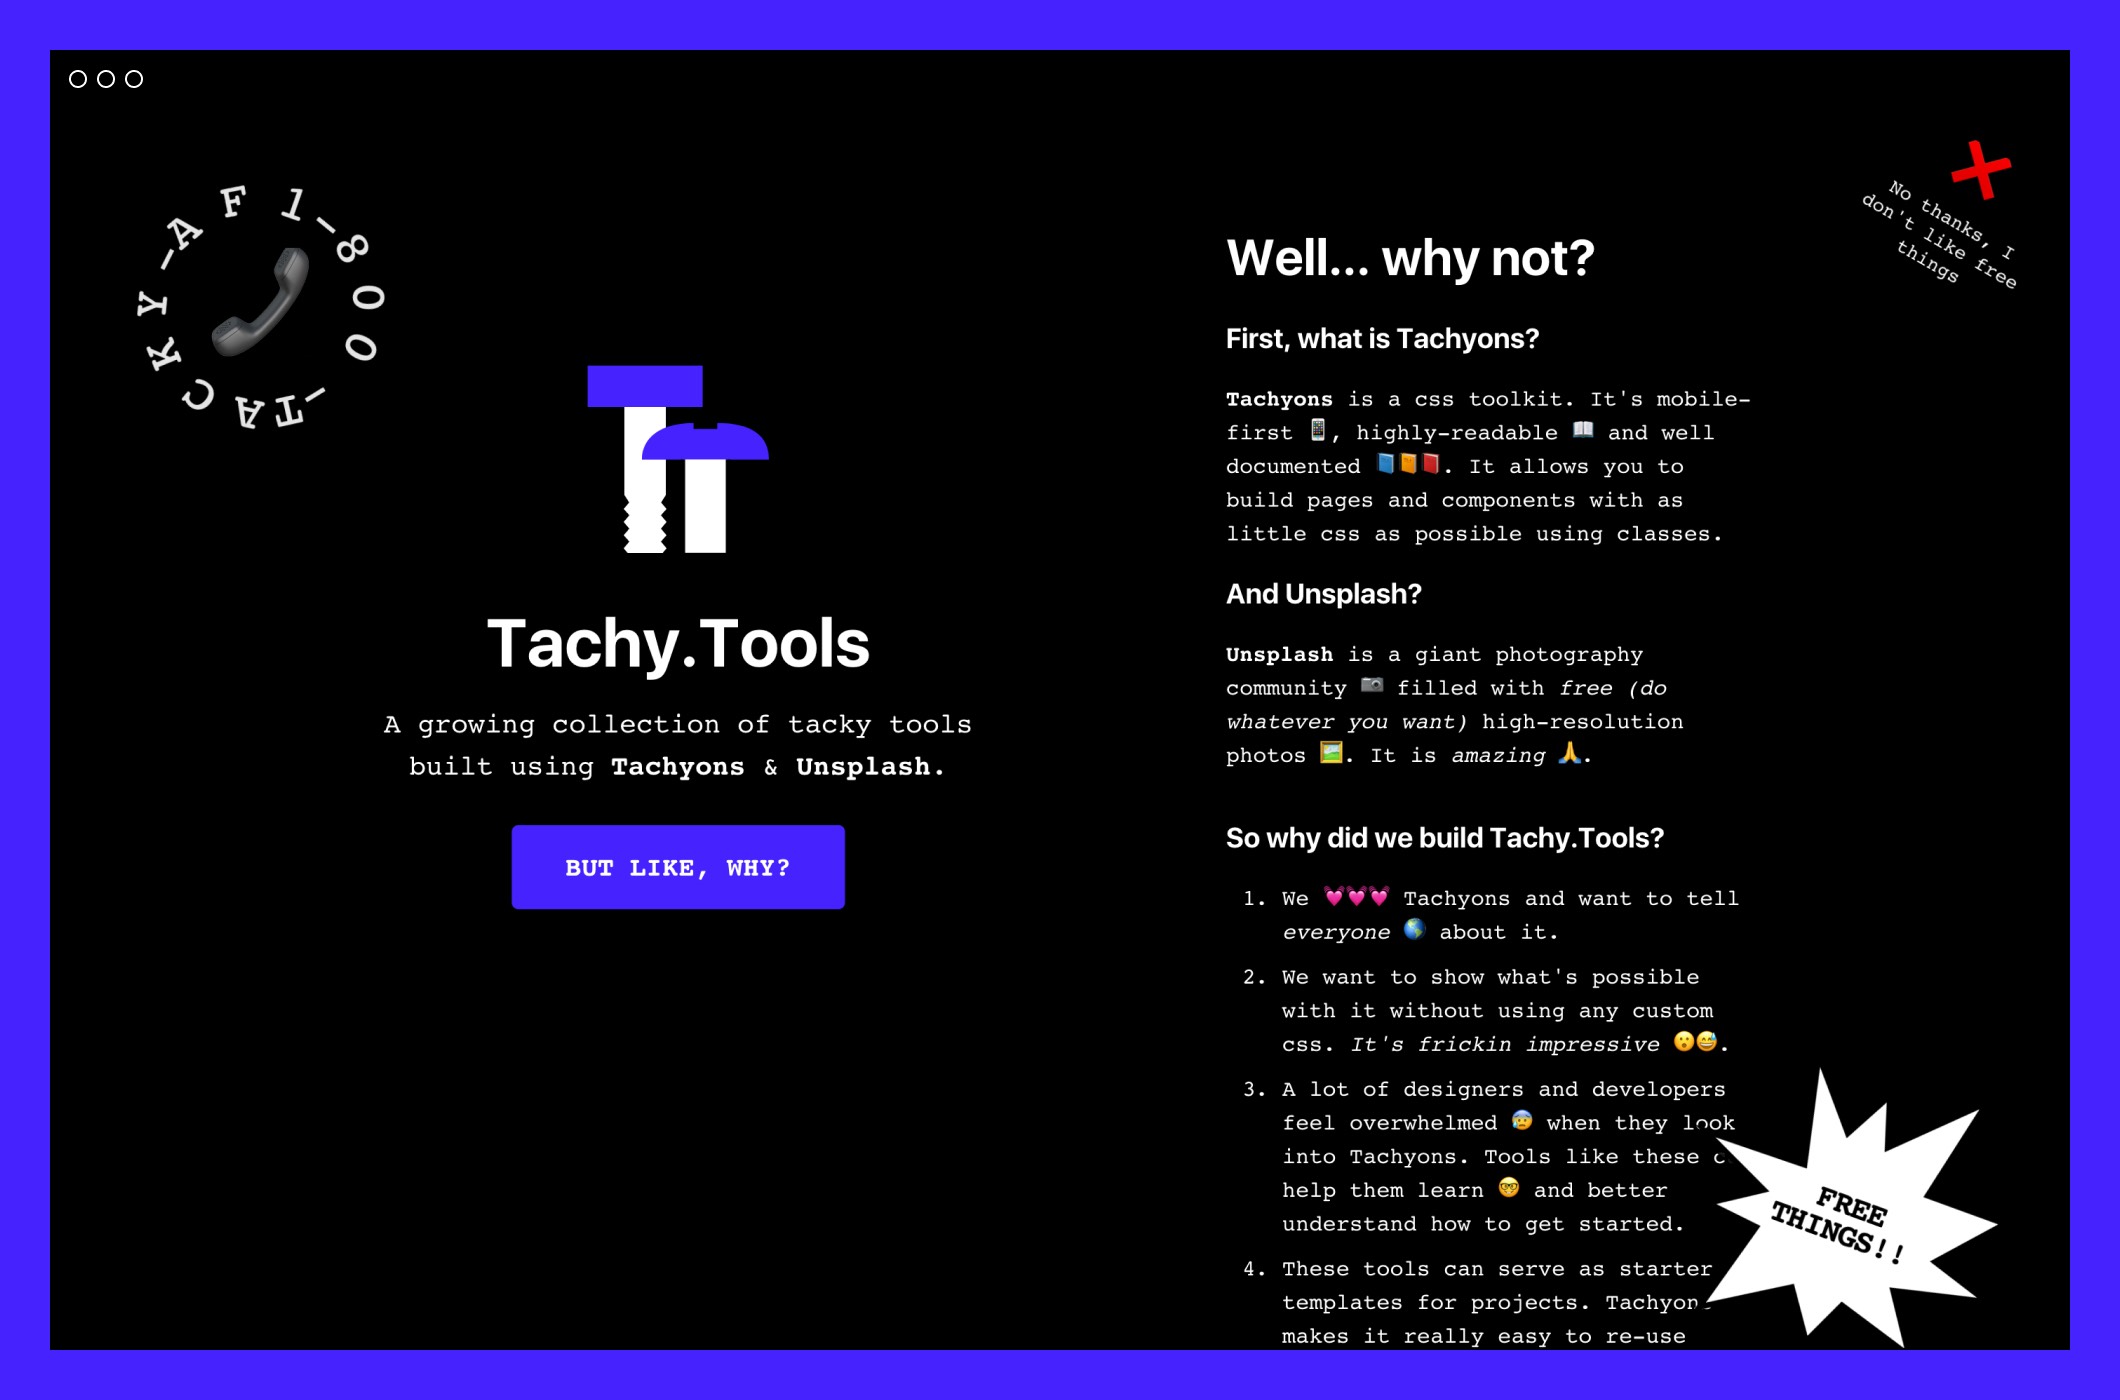 Tachy Tools about page